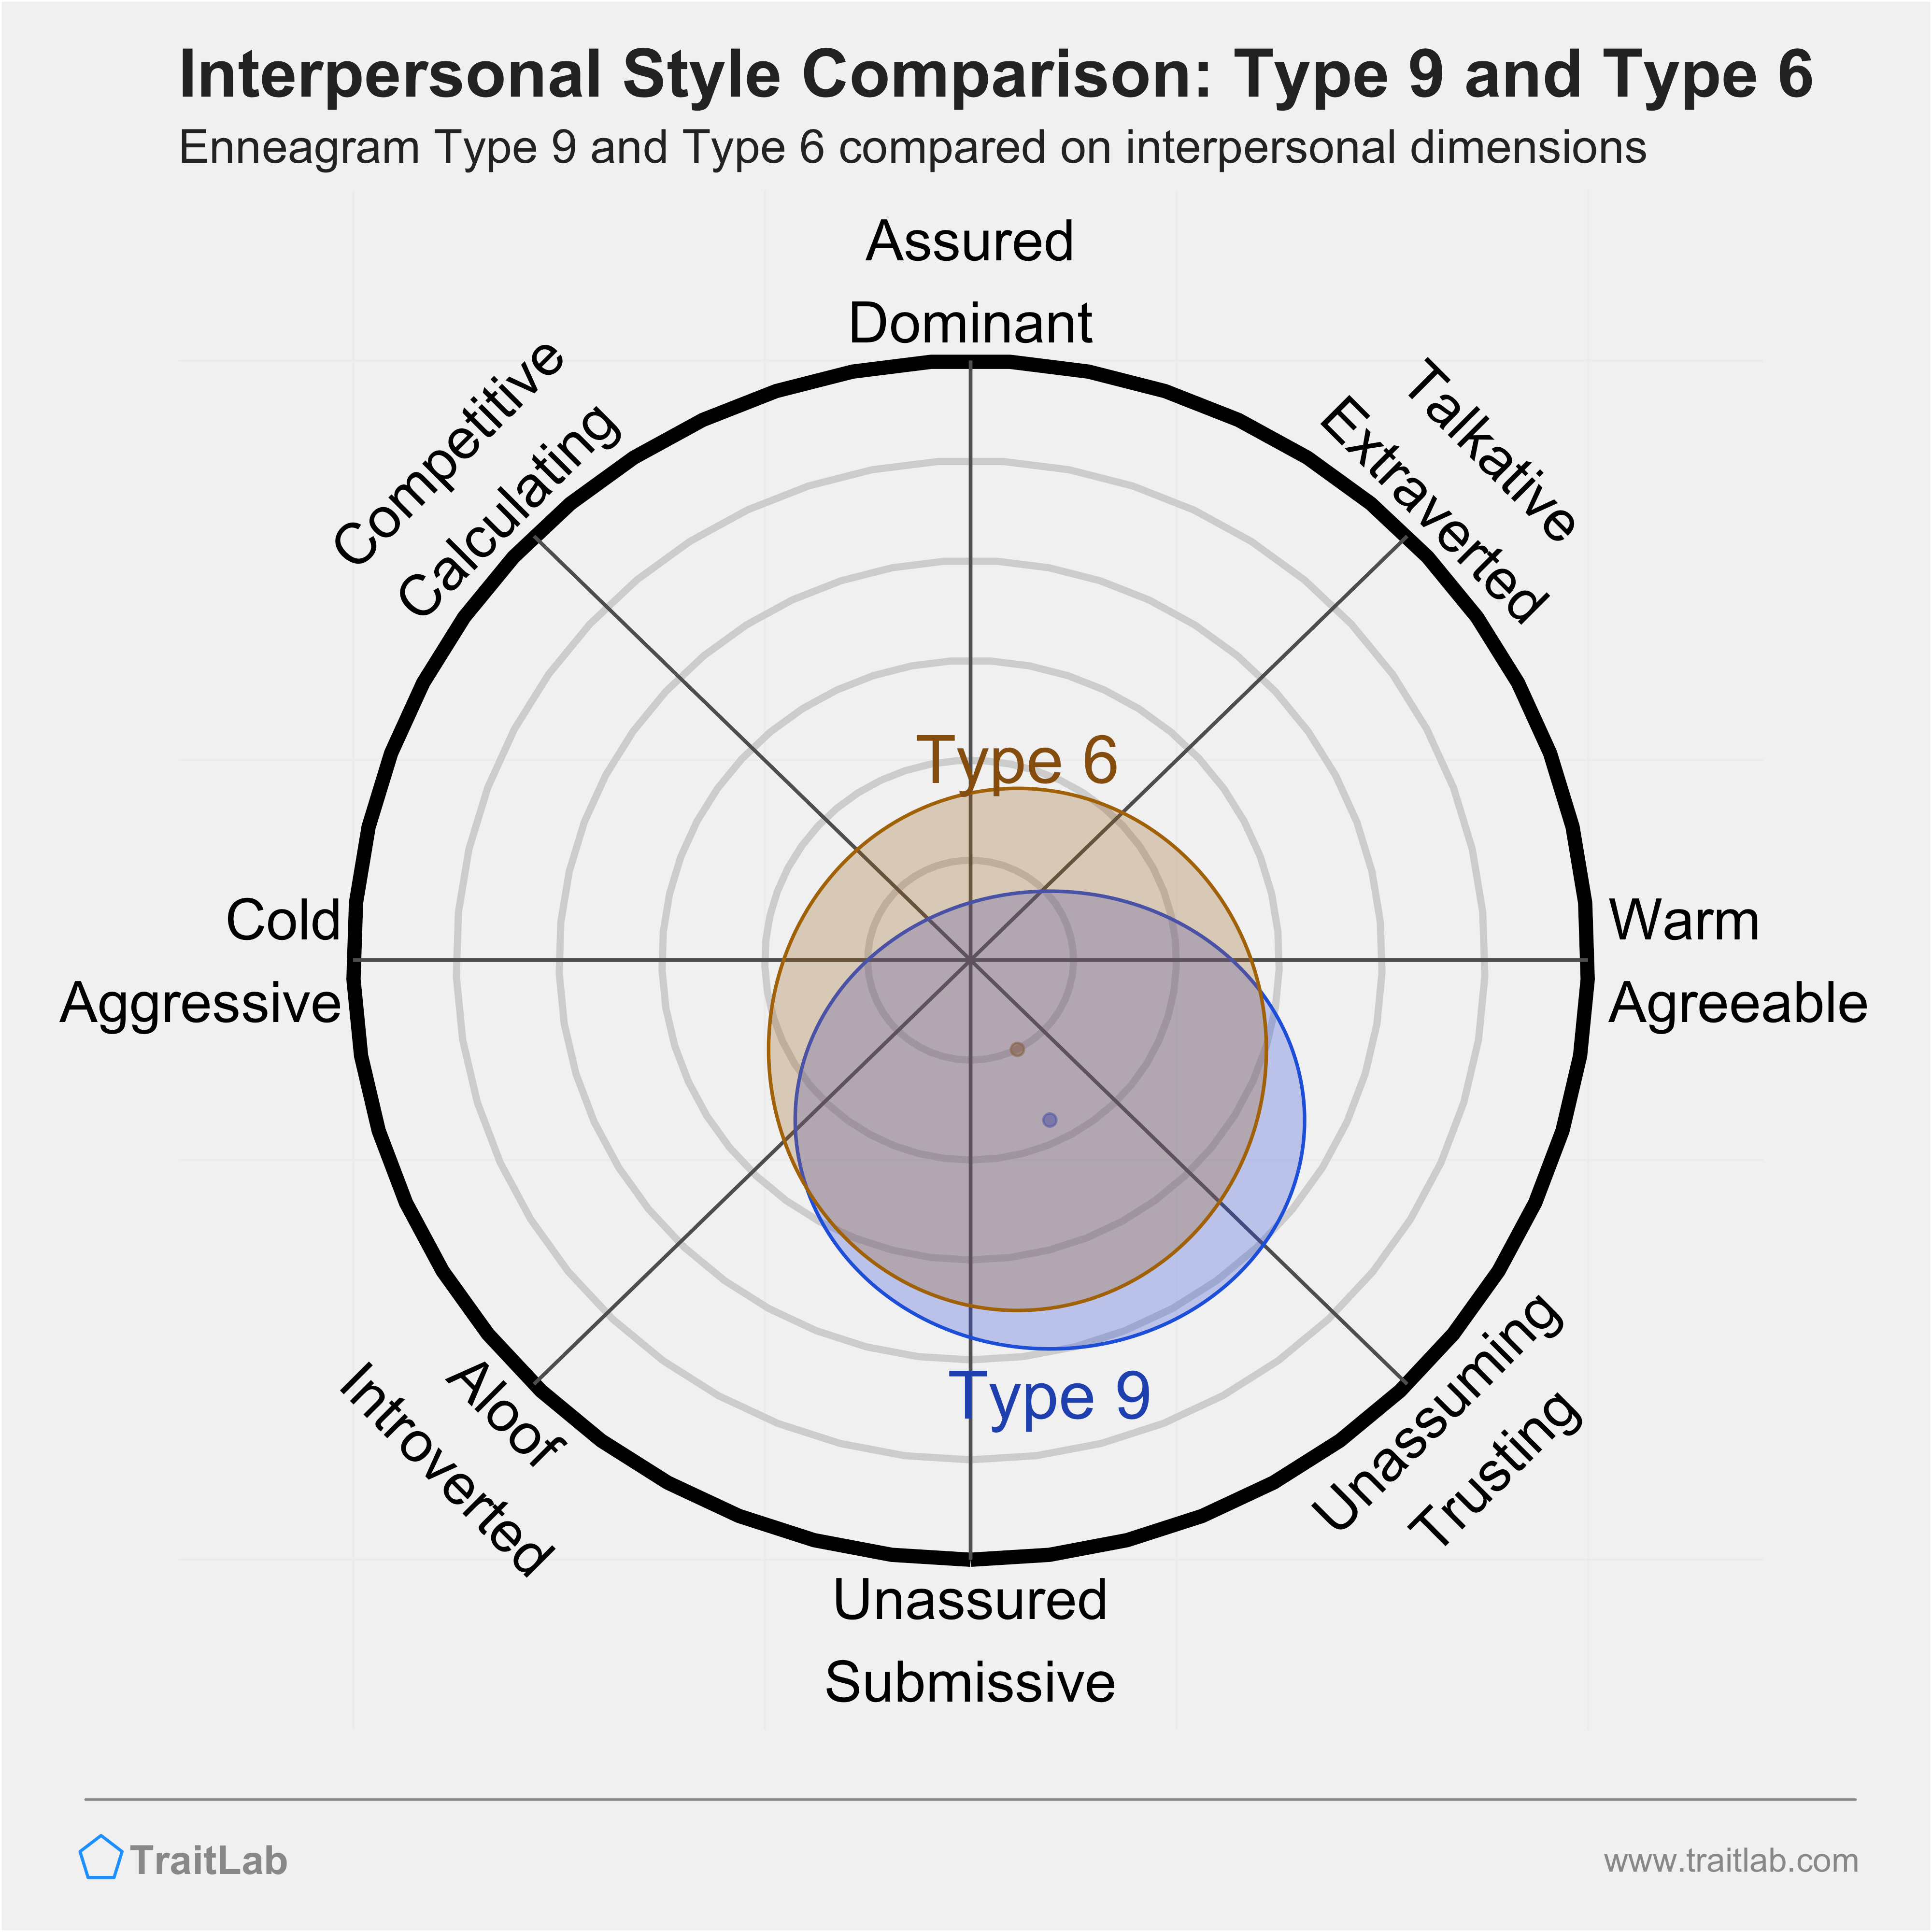 Enneagram Type 9 and Type 6 comparison across interpersonal dimensions